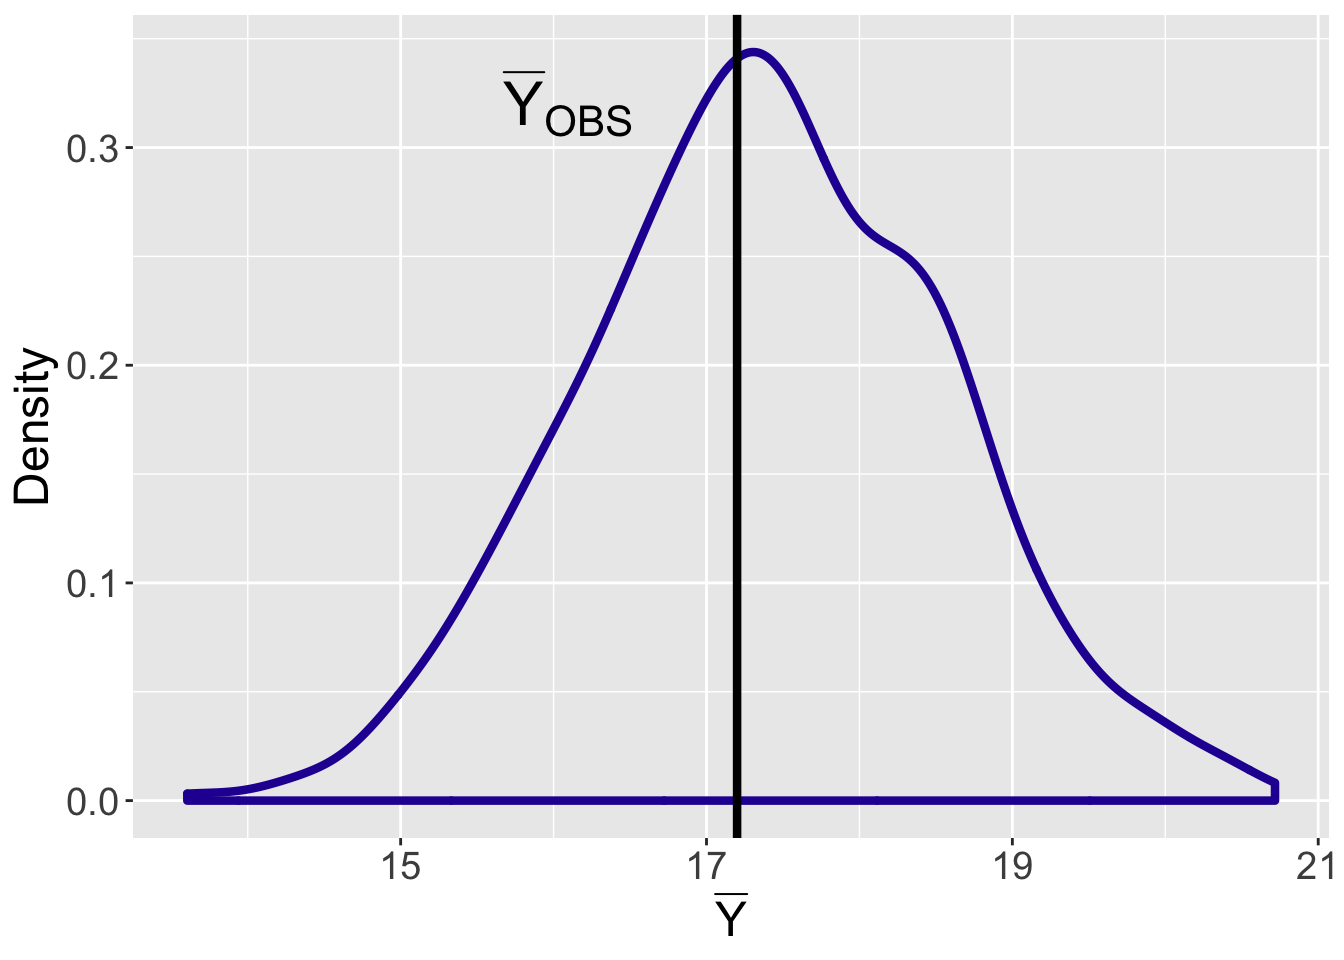 Display of the posterior predictive mean time-to-serve for twenty observations. The observed mean time-to-serve value is displayed by a vertical line.